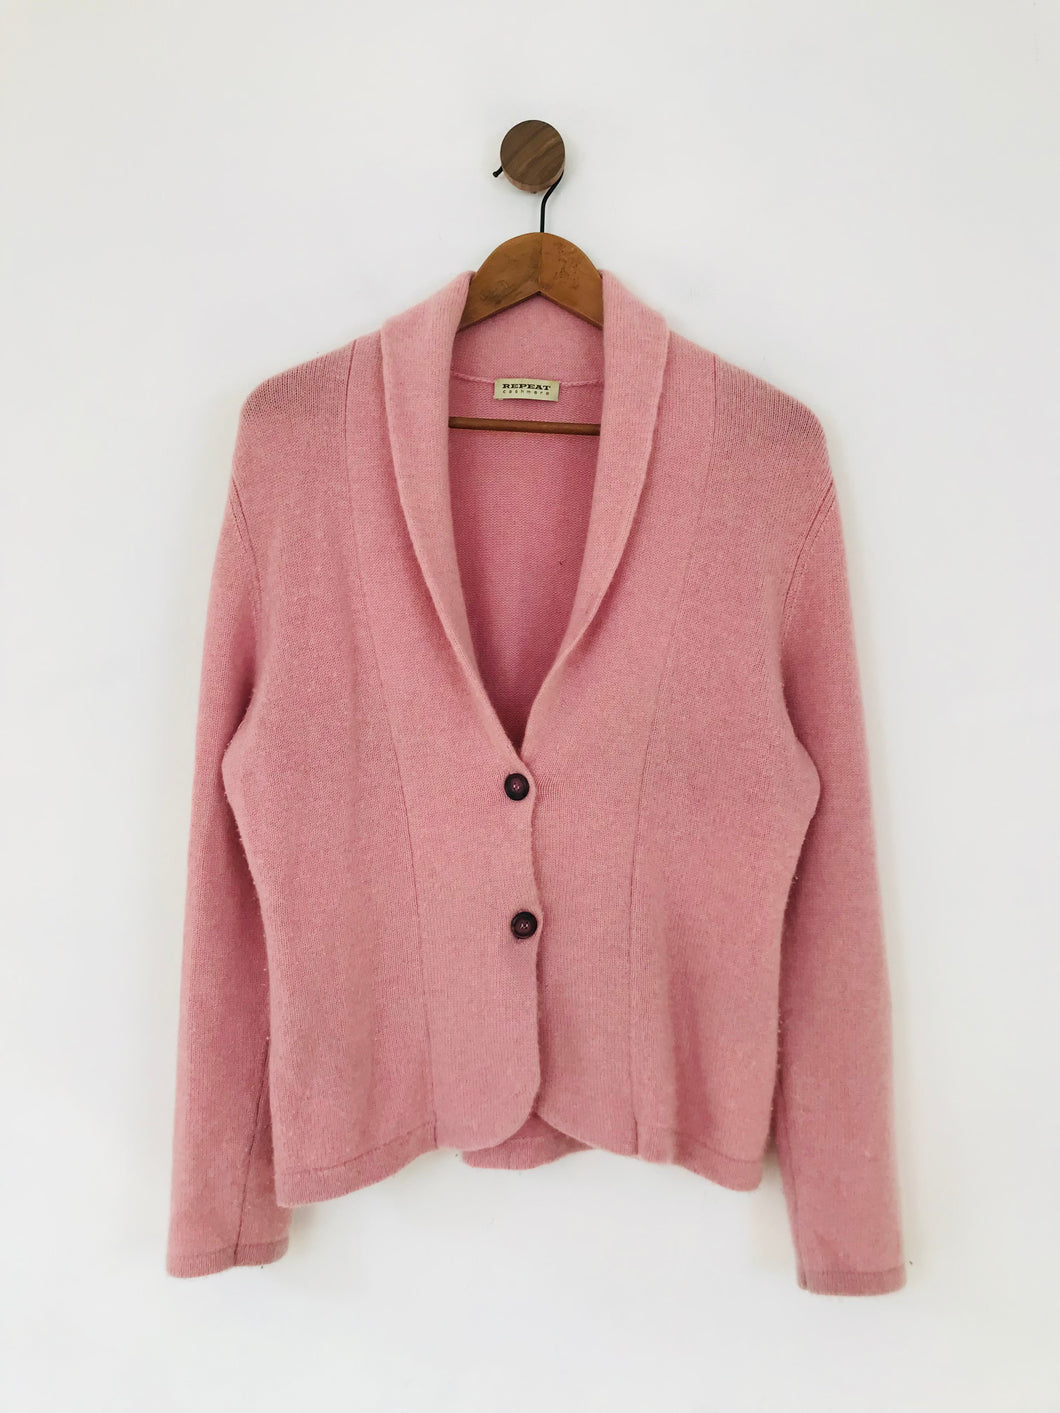 Repeat Cashmere Women's Cashmere Roll Neck Cardigan | UK12 | Pink